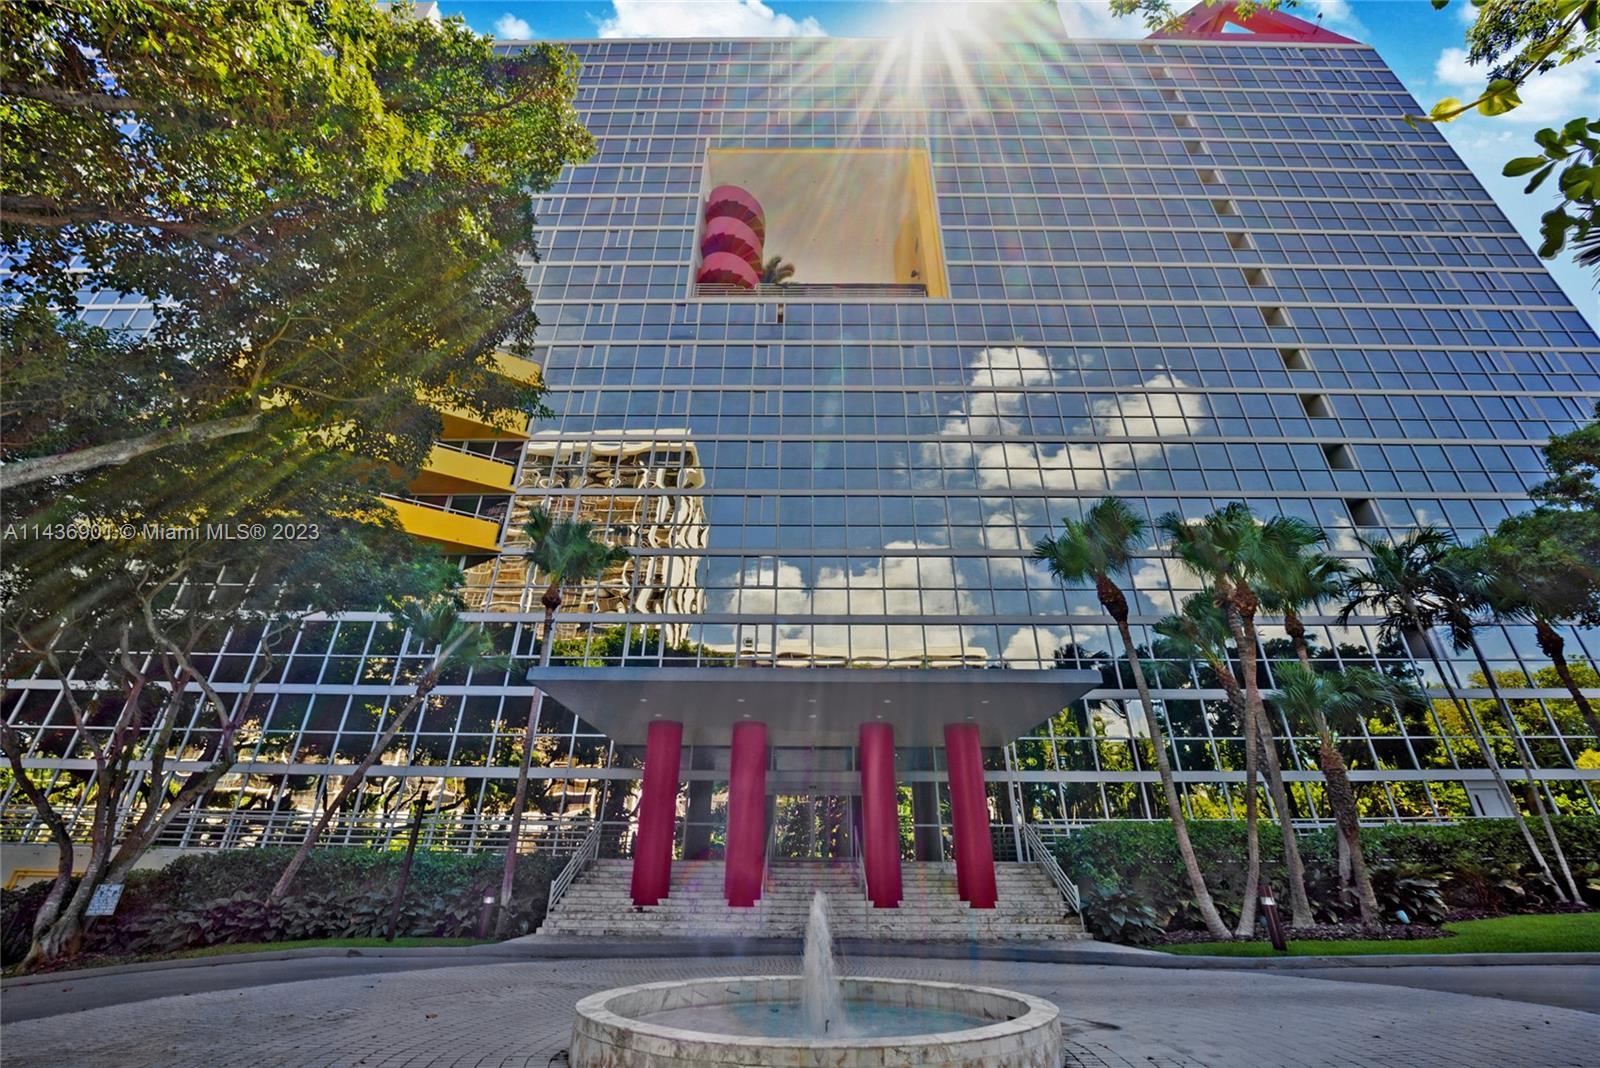 Your chance to own a piece of Miami history! Atlantis on Brickell is one of Miami's most iconic buil